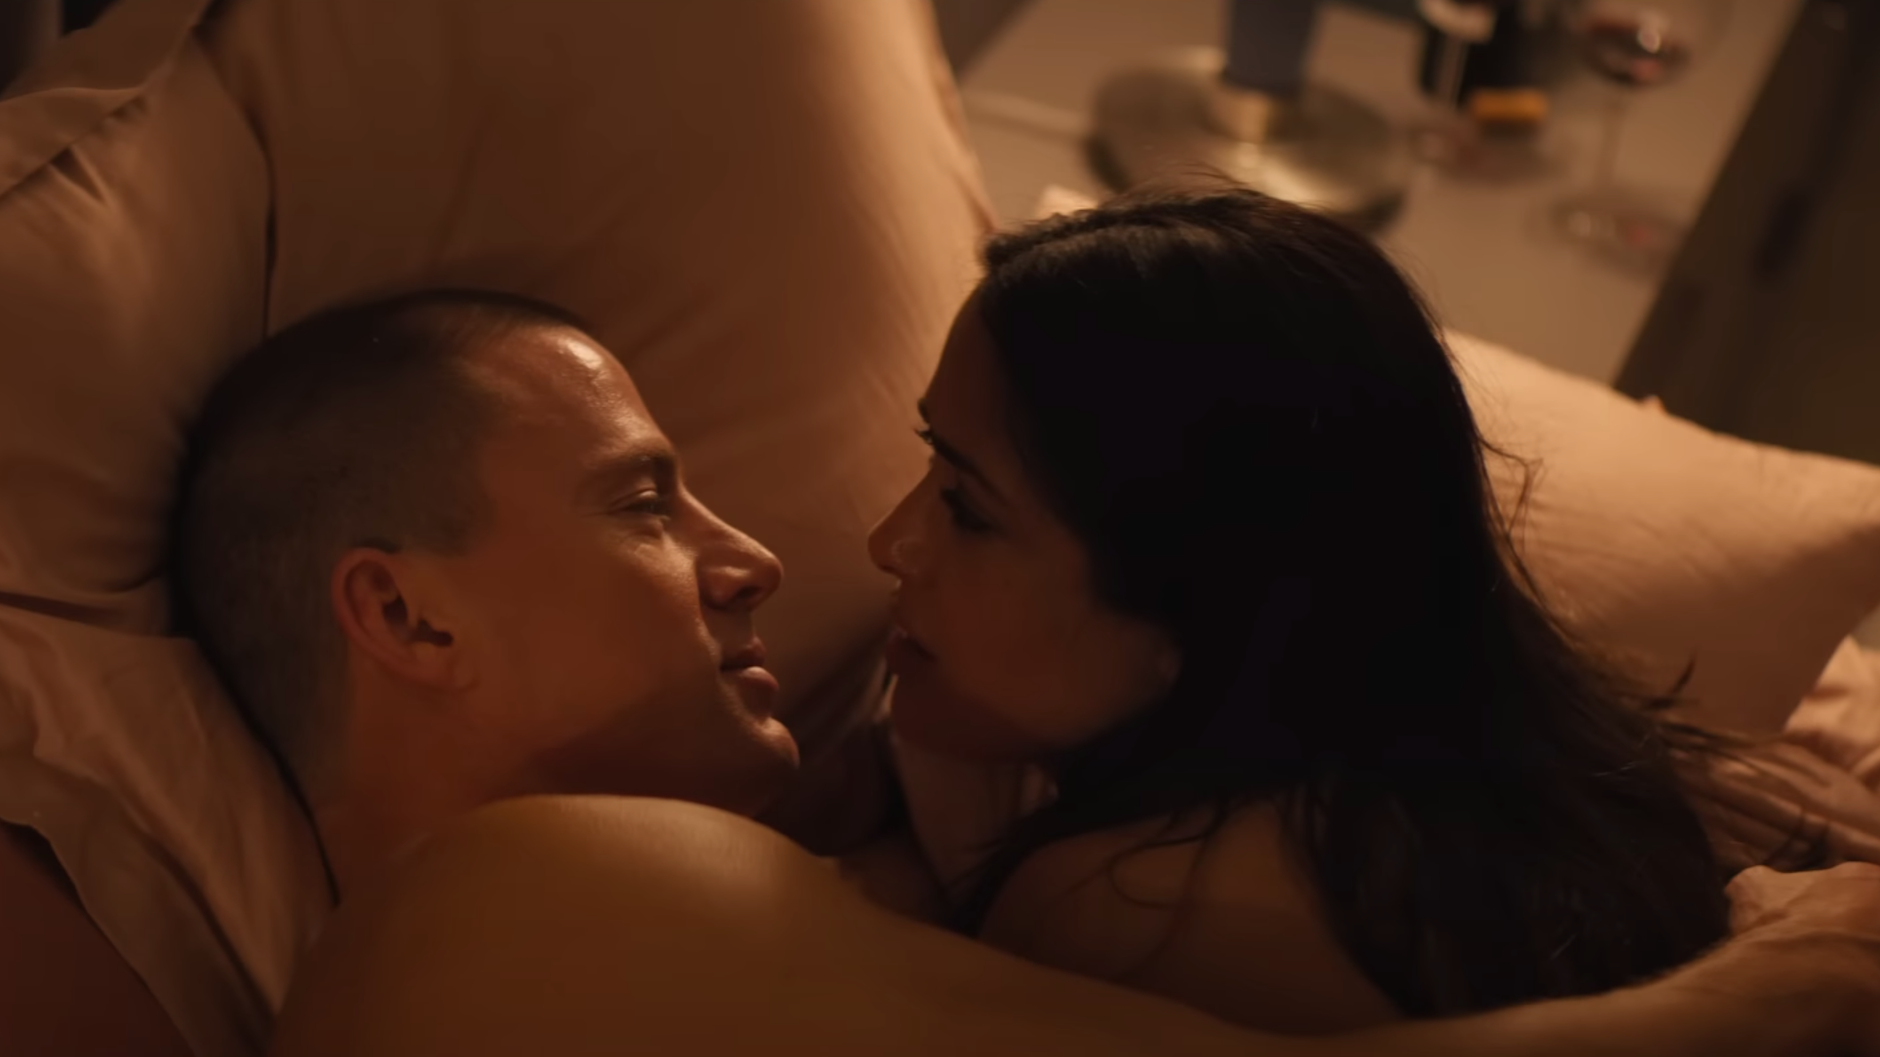 Malaiyalmsex Video Dowload - The 12 Best New Romance Movies to Watch in 2023